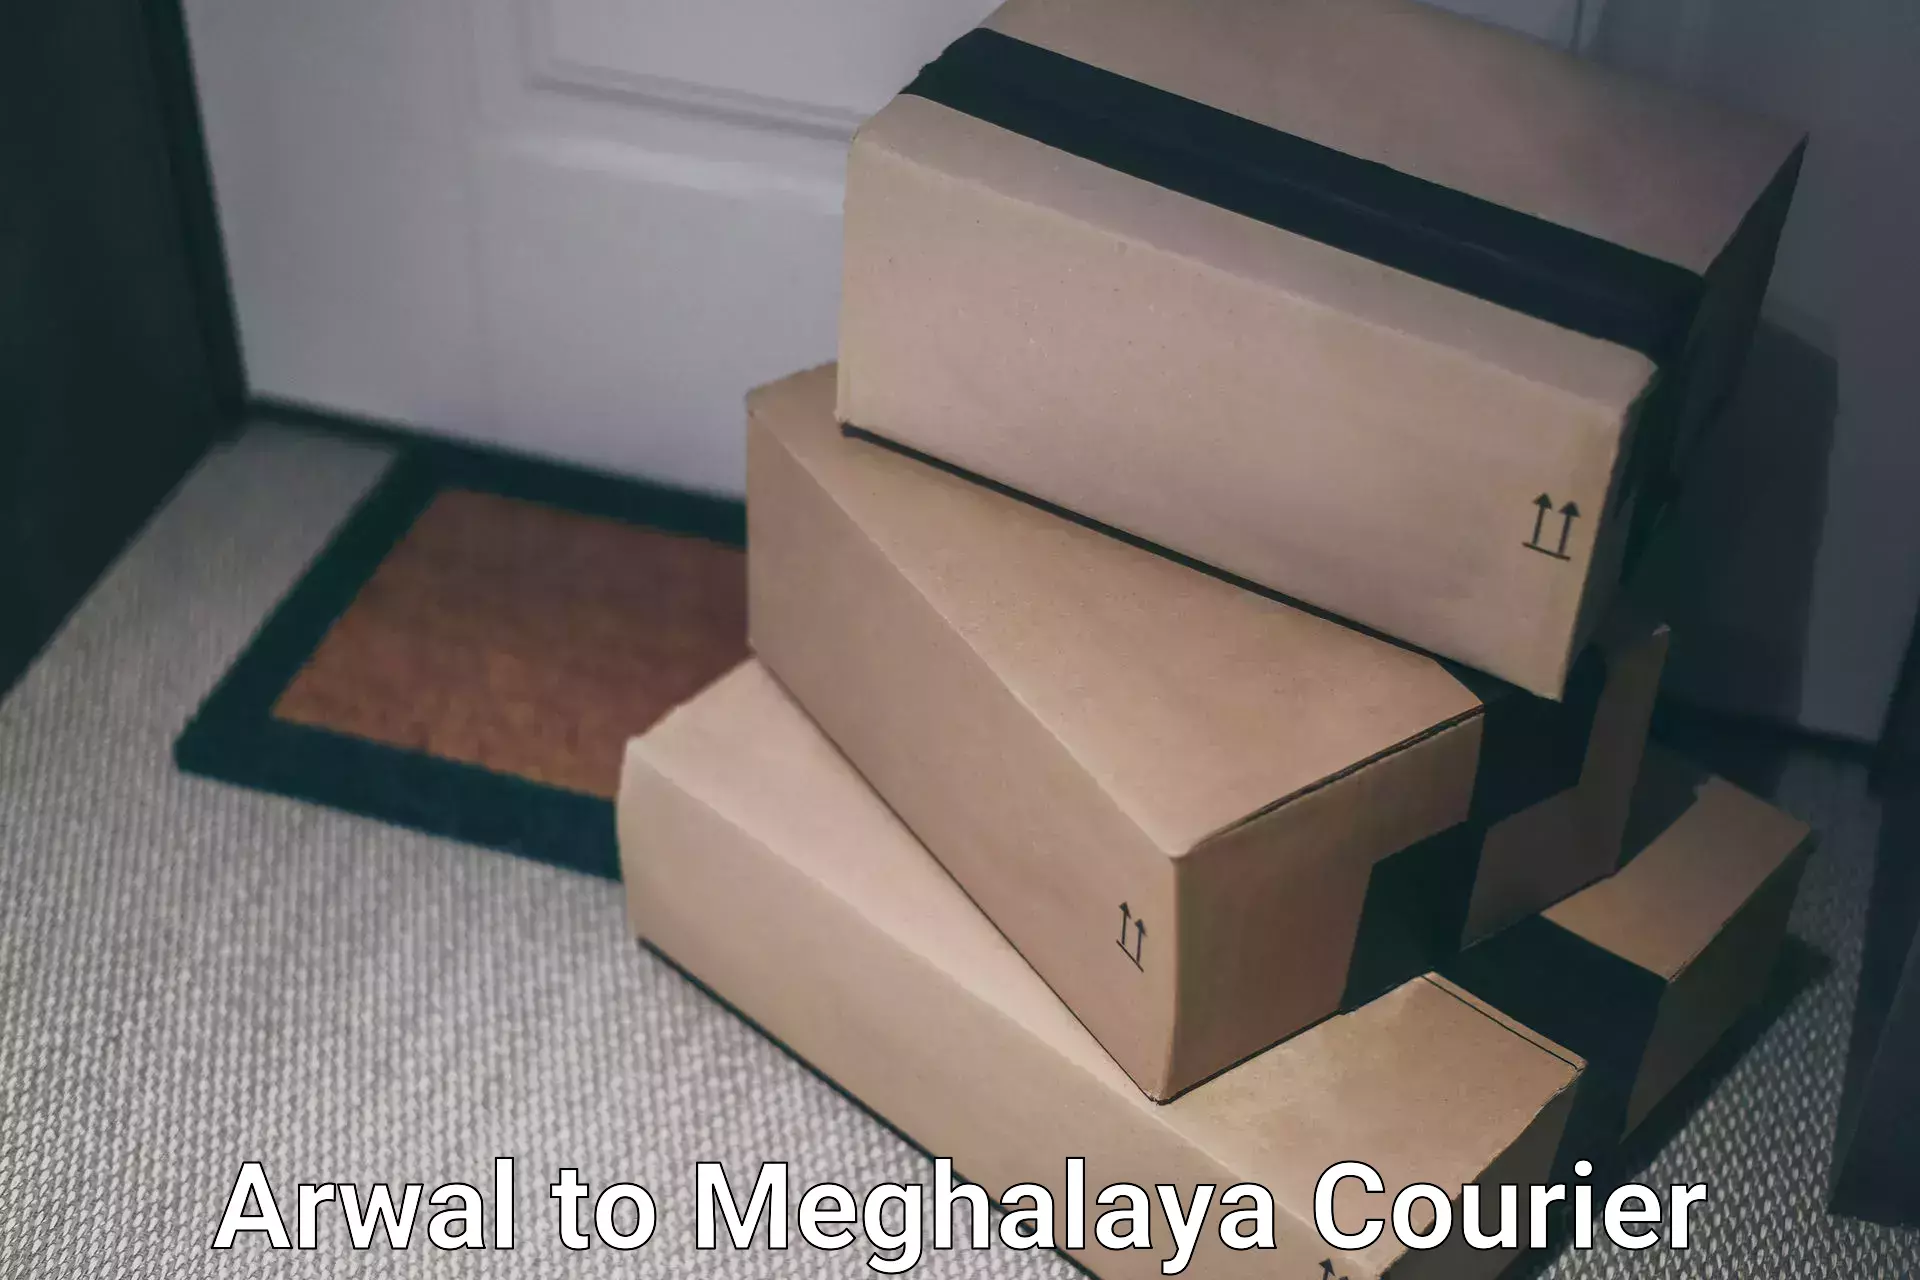 Easy access courier services Arwal to Shillong